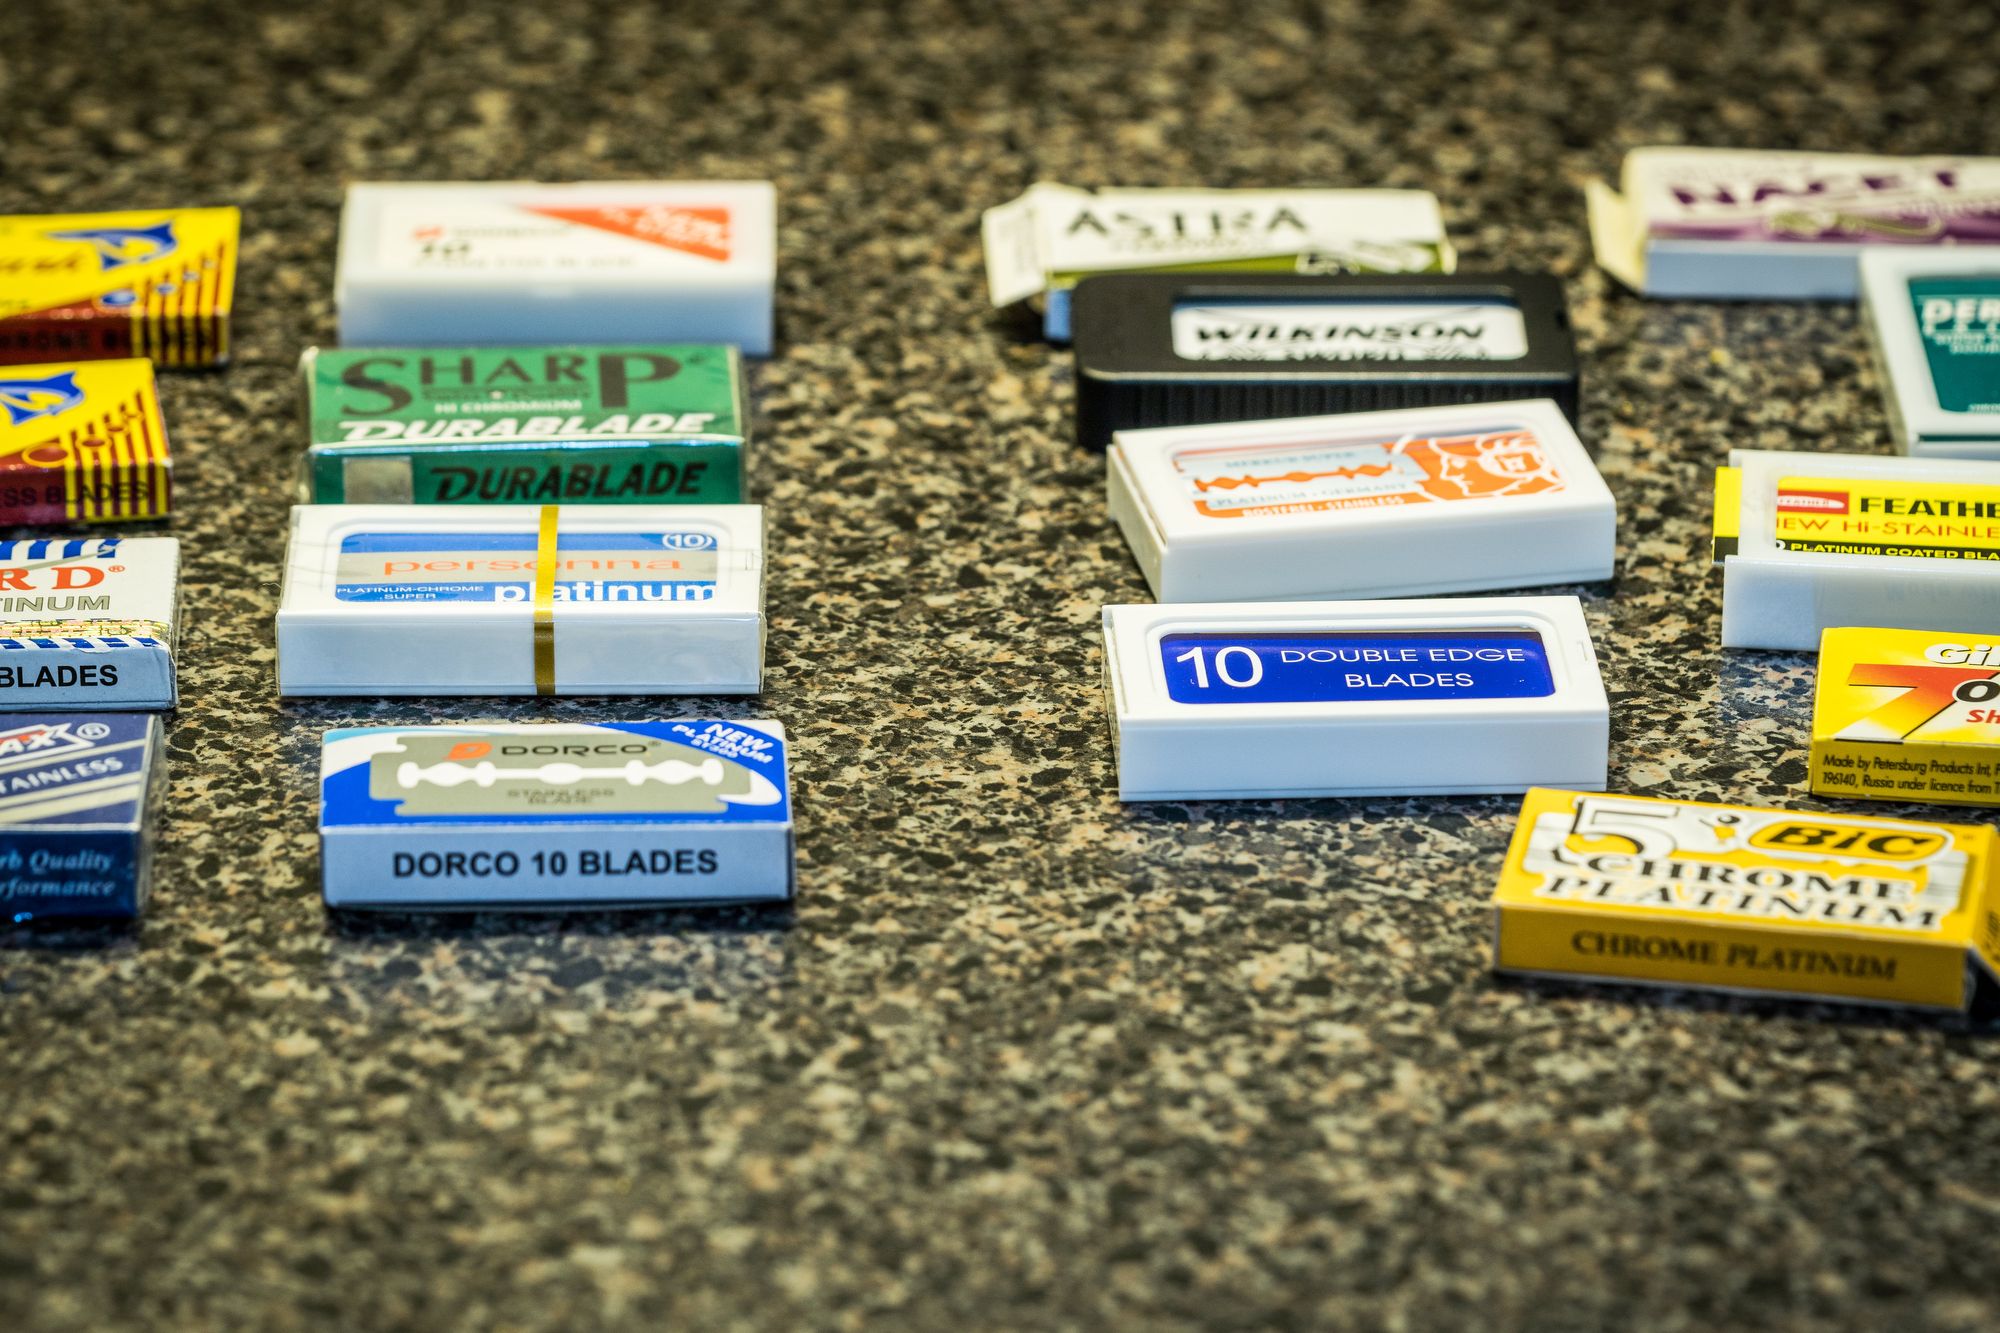 A number of packs of razor blades on the counter